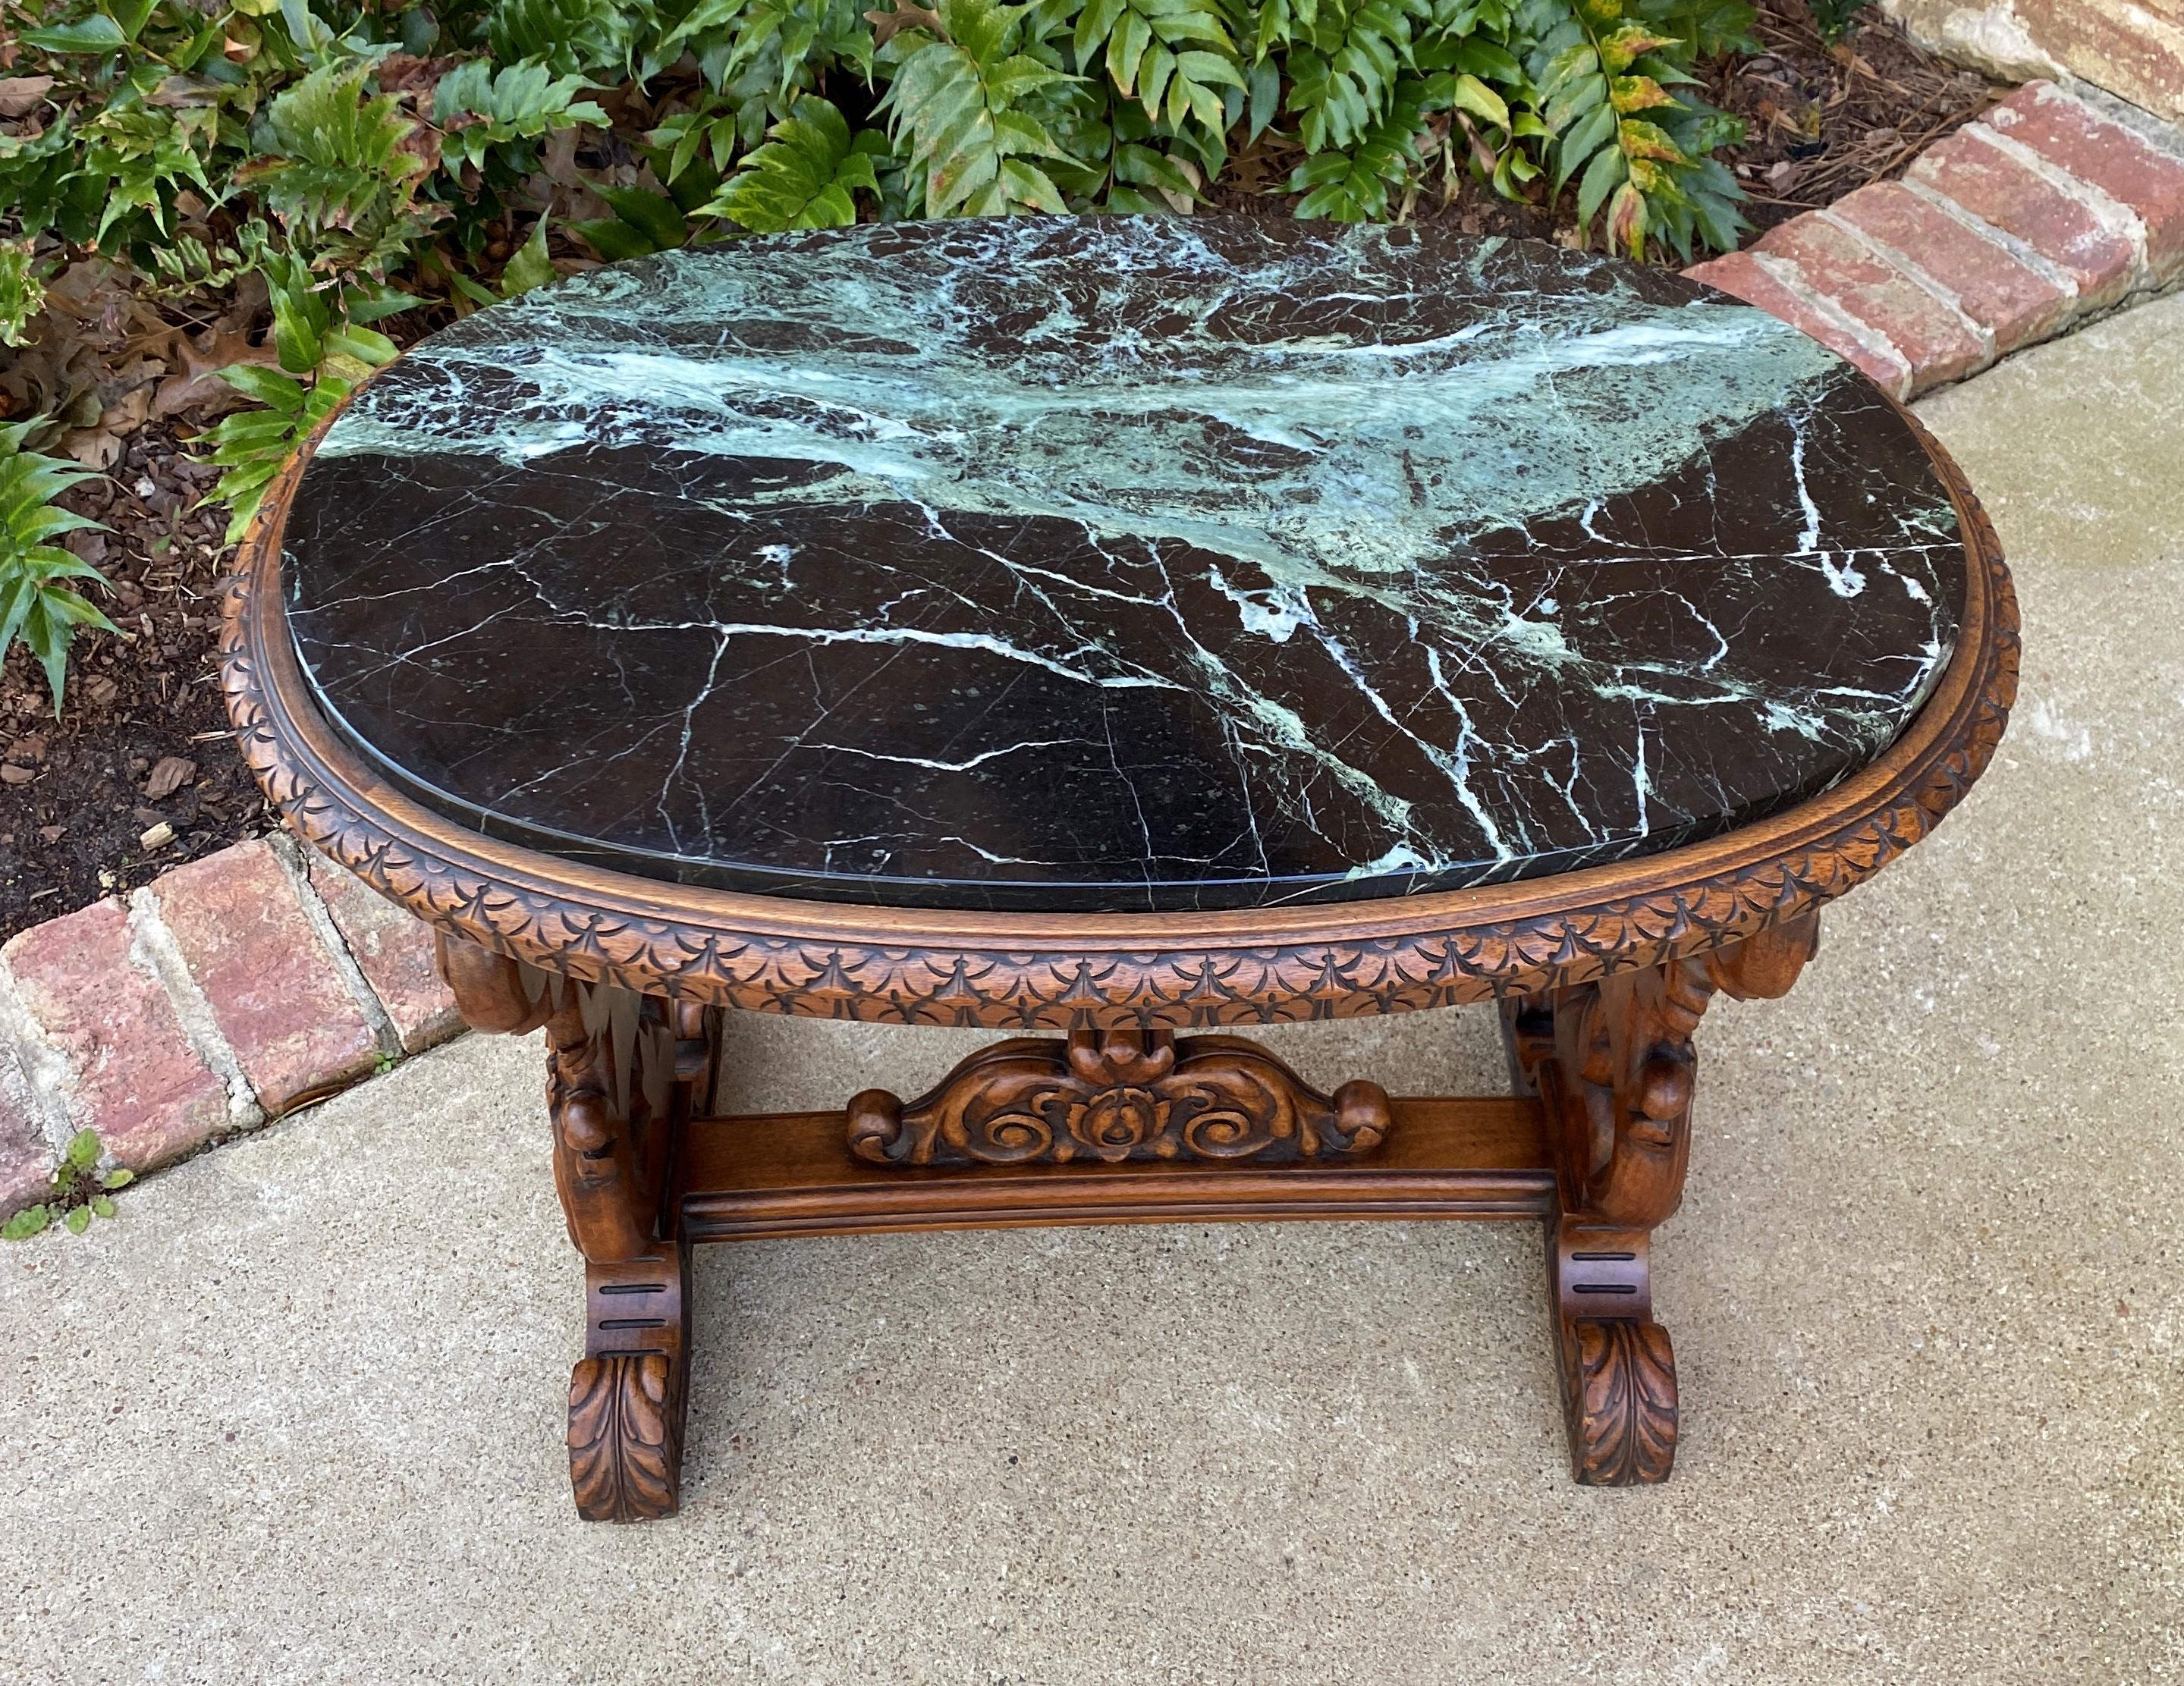 Unique antique carved French Renaissance Revival oval coffee table or bench with green marble top in walnut~~c. 1920s

 Nicely carved cherubs and rosettes on sides and stretcher~~green marble top with beautiful veining

Versatile piece with so